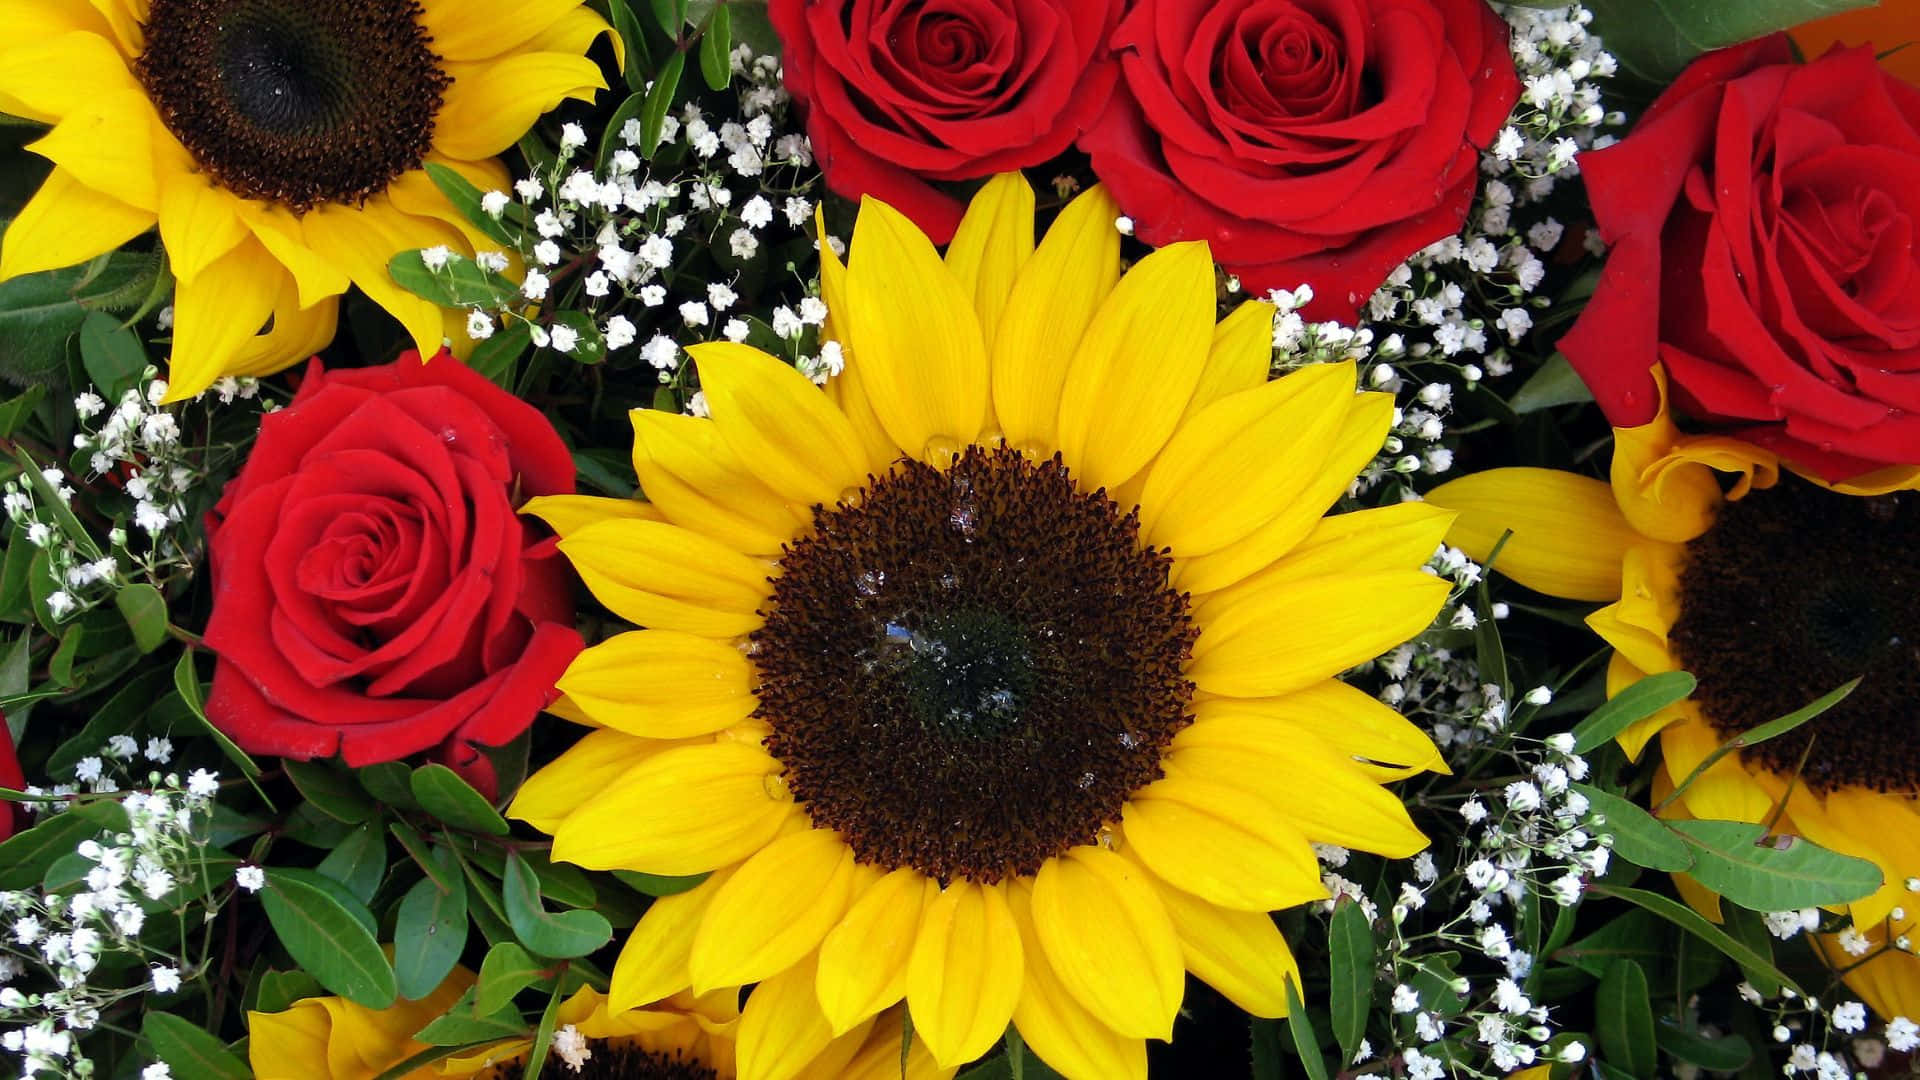 red roses and yellow sunflower free image  Peakpx